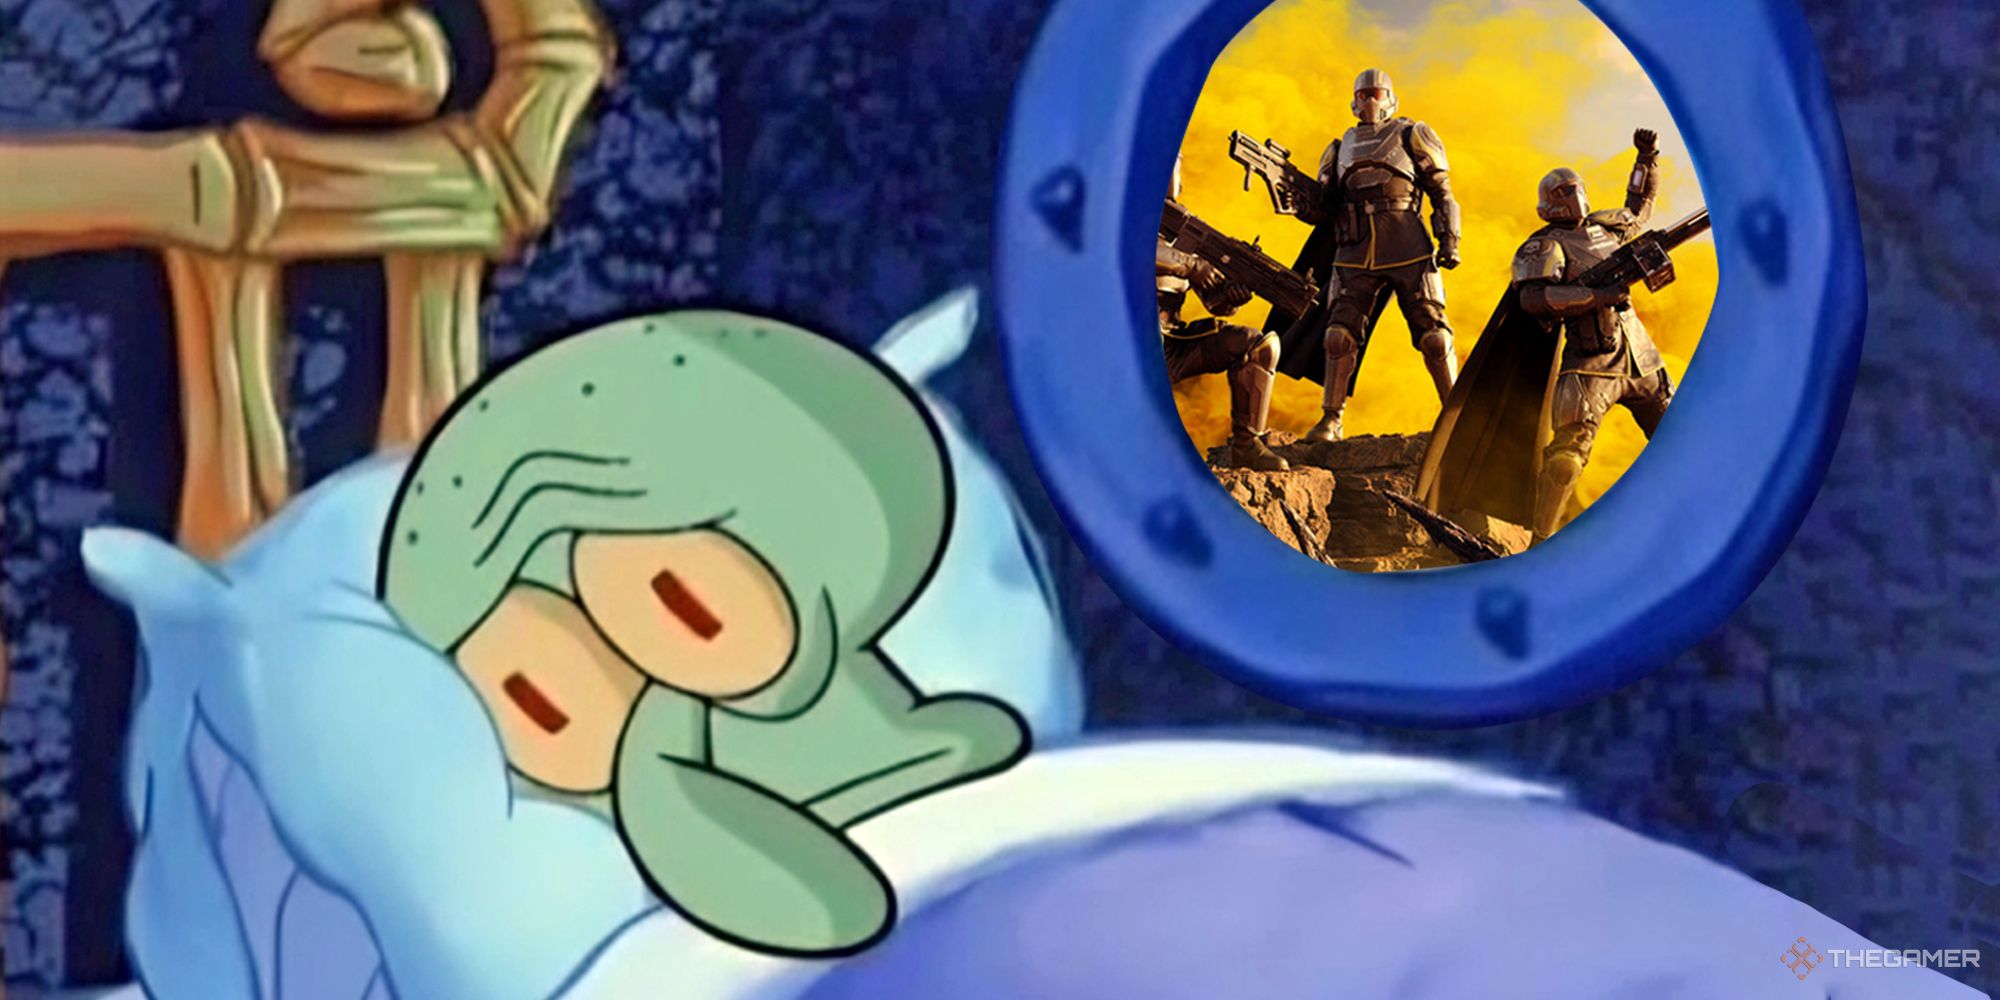 Squidward lies troubled in bed, facing away from a porthole through which you can see Helldivers cheering